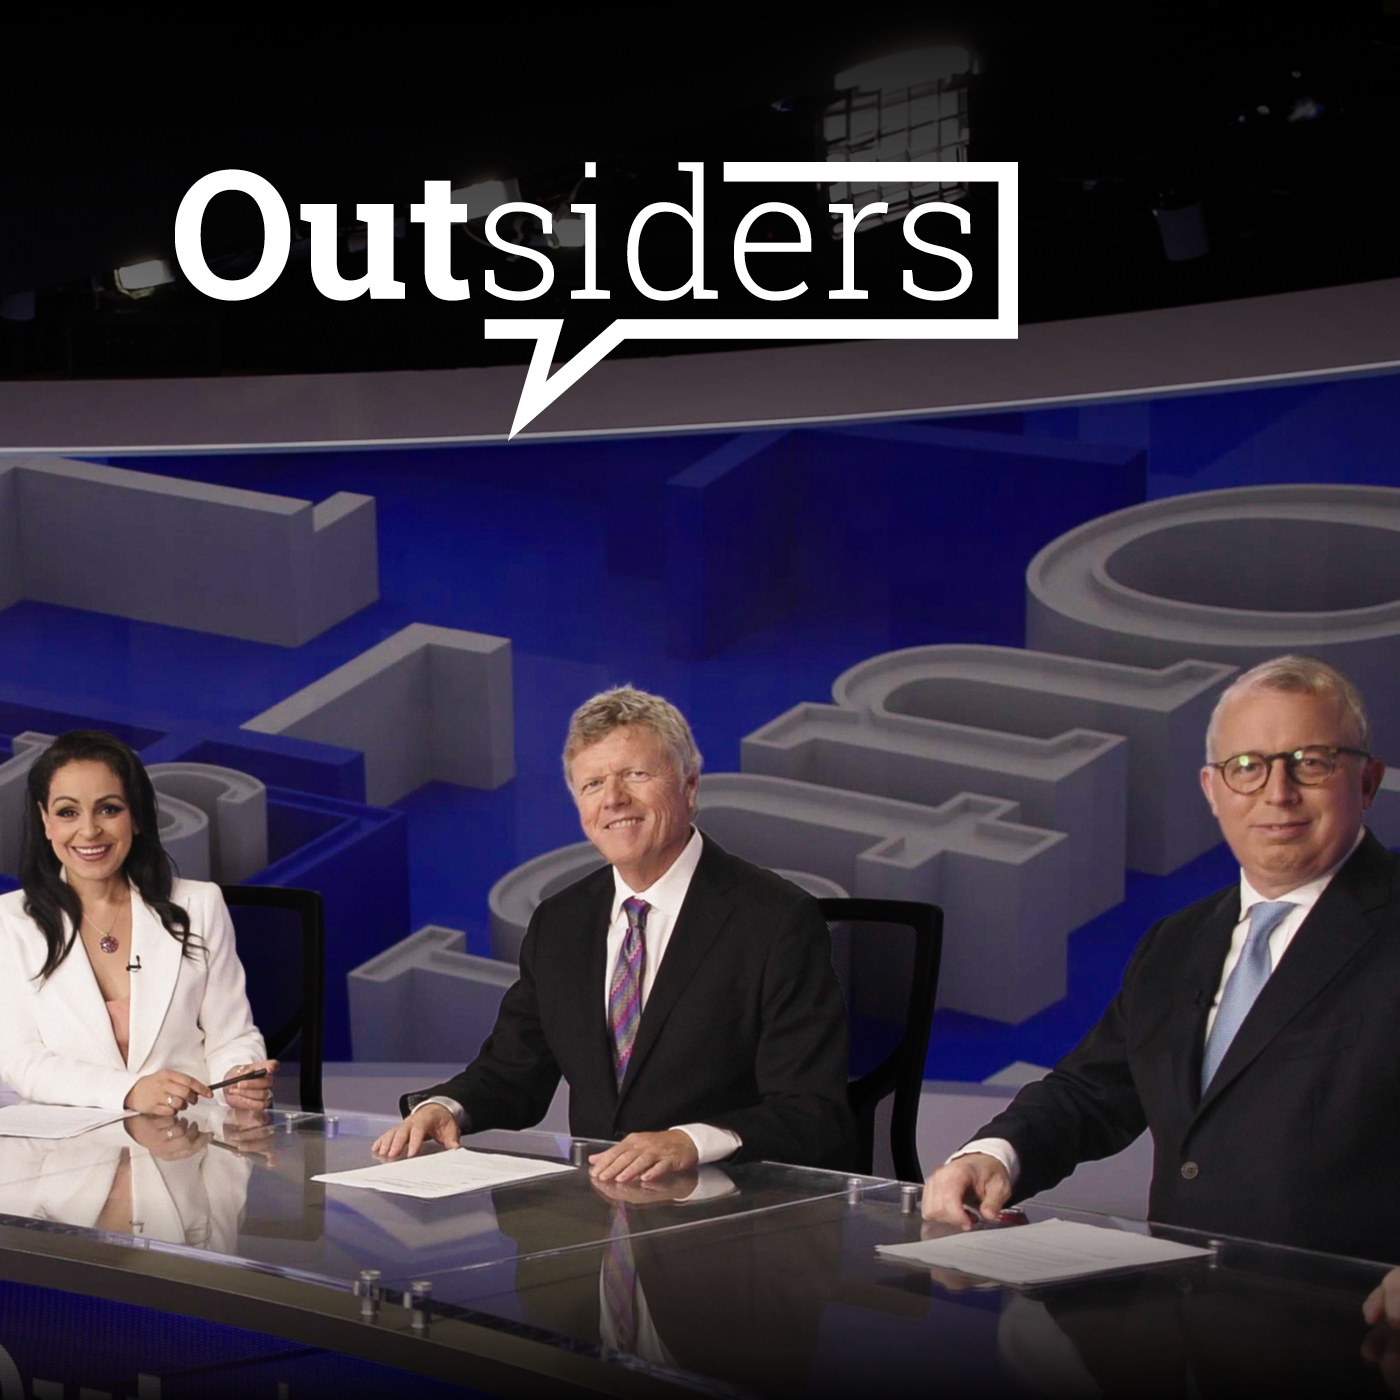 Outsiders, Sunday 9th May